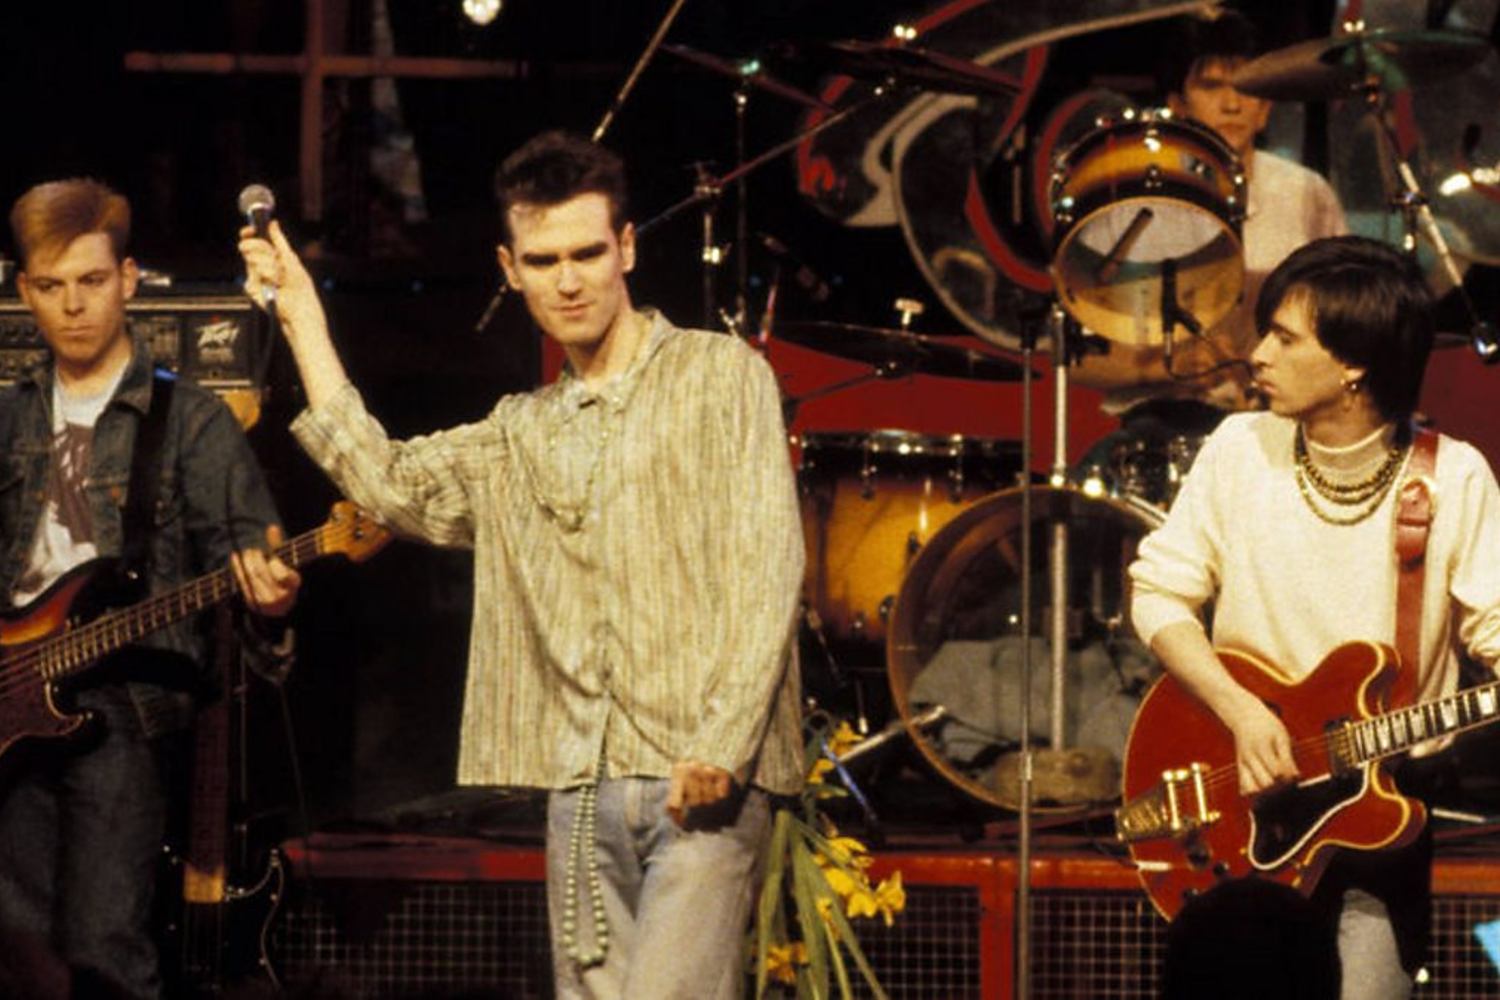 The Smiths Live